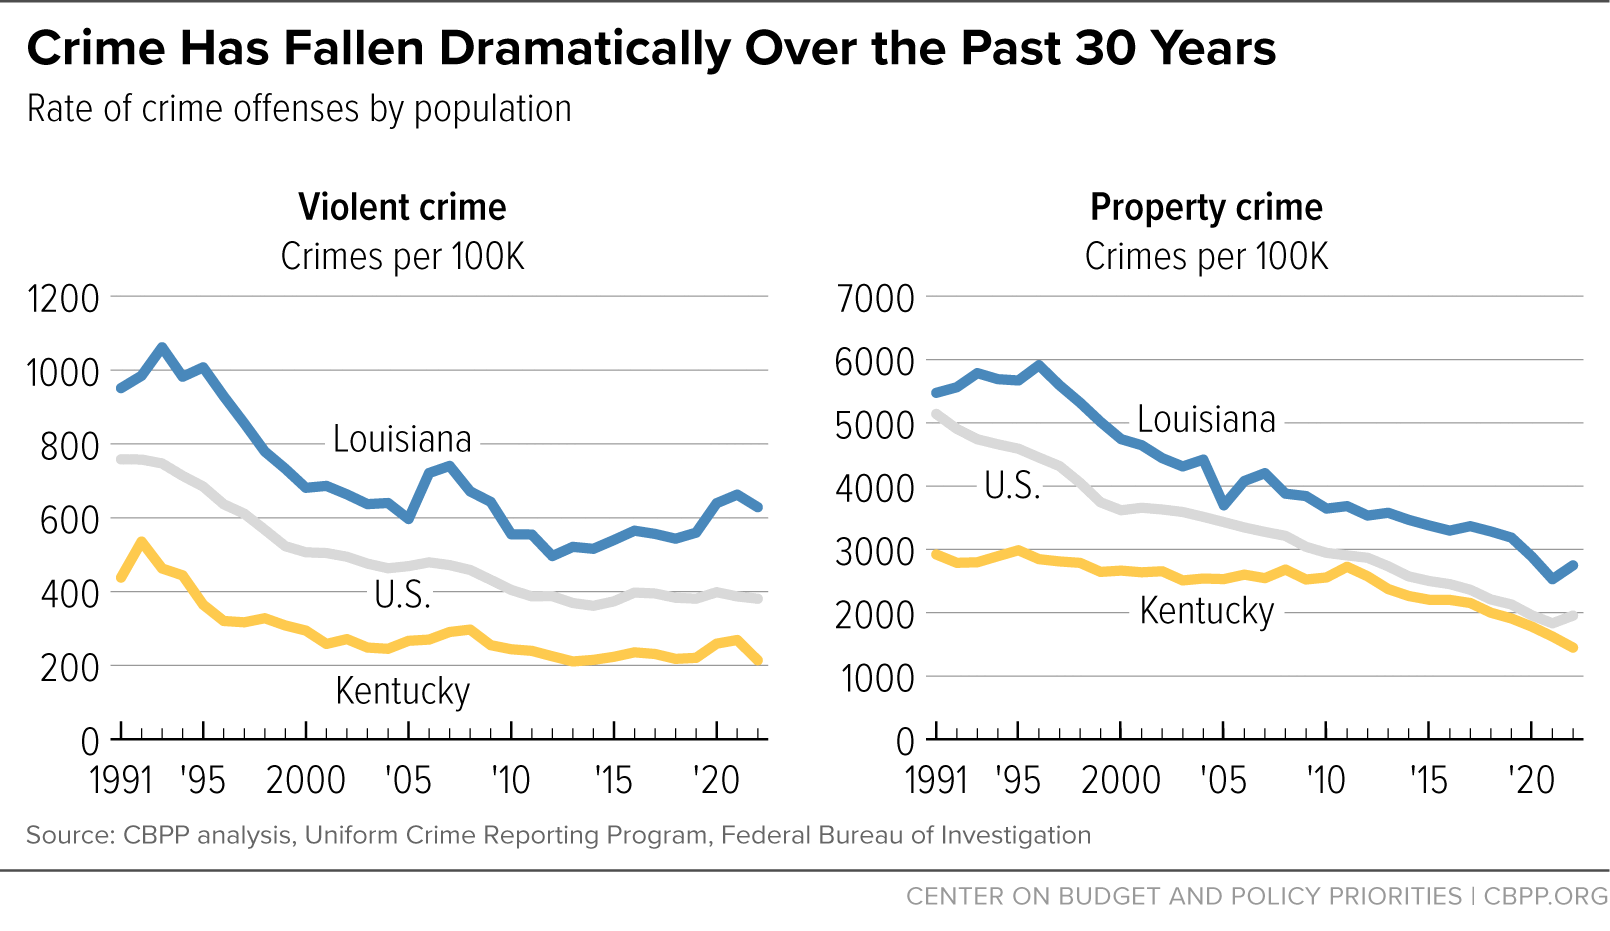 Crime Has Fallen Dramatically Over the Past 30 Years